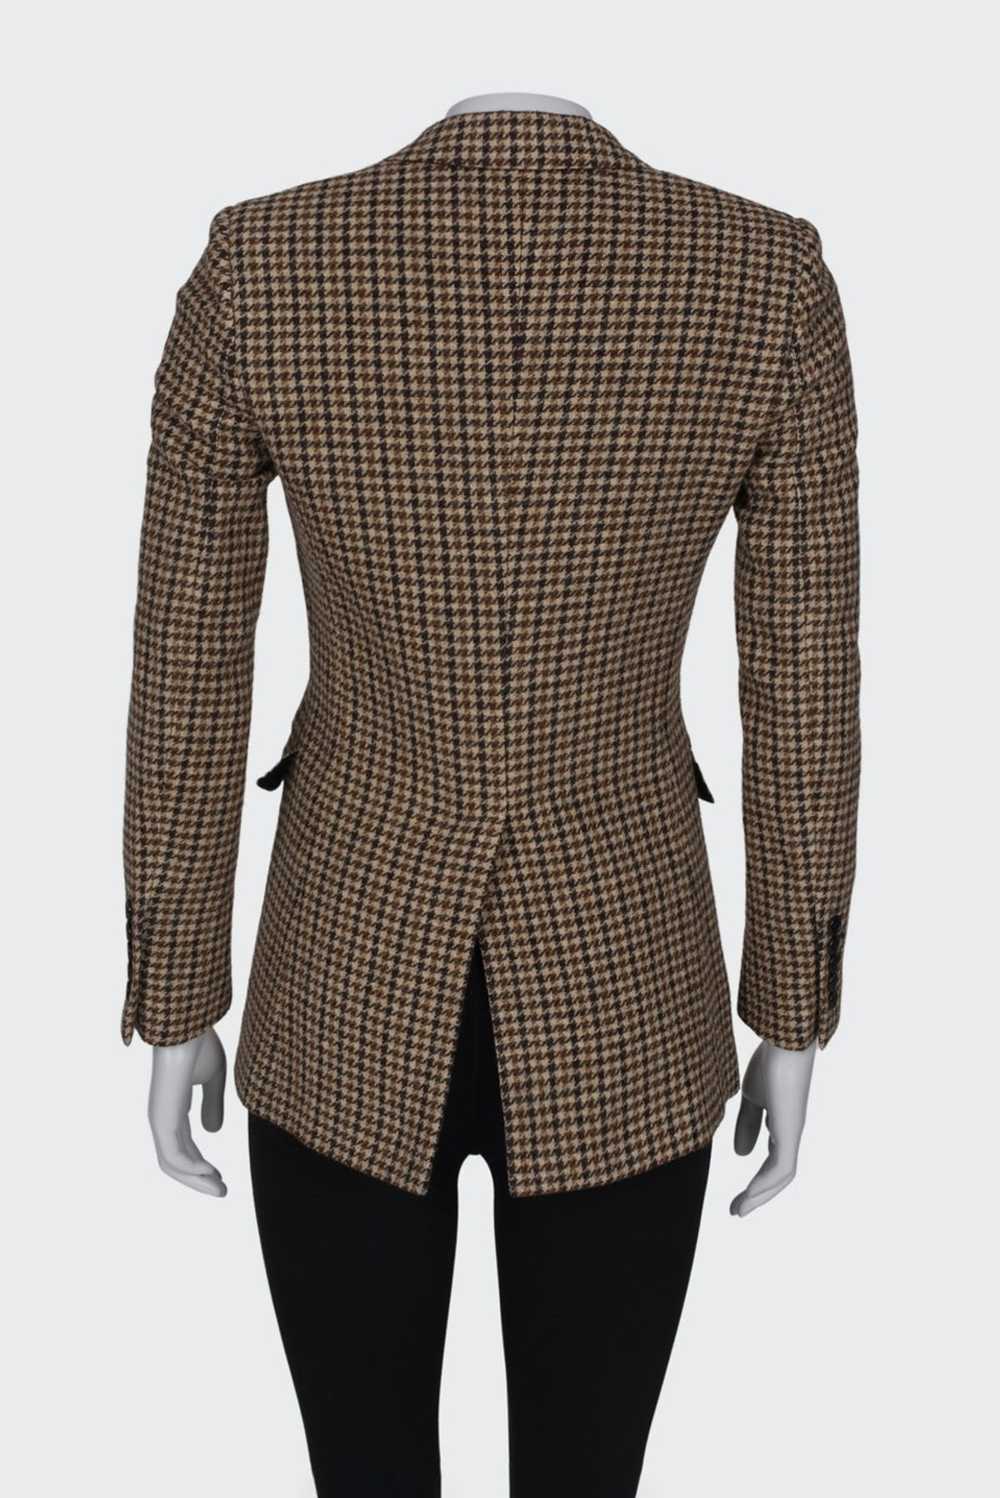 Yves Saint Laurent Jacket with a houndstooth print - image 4